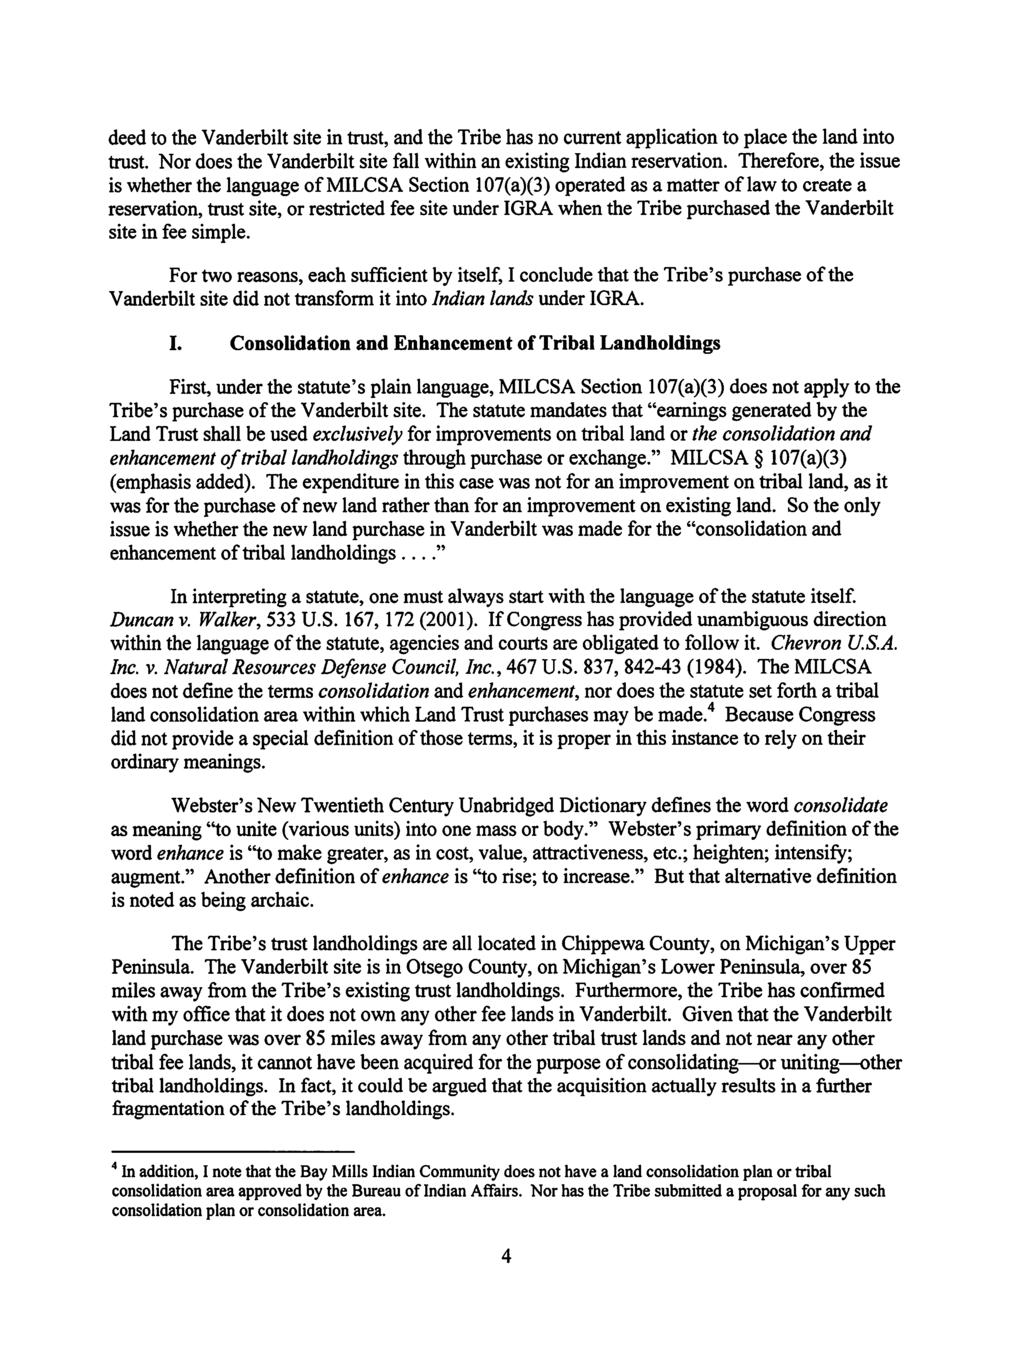 Case 1:18-cv-02035-TNM Document 1-1 Filed 08/30/18 Page 5 of 17 deed to the Vanderbilt site in trust, and the Tribe has no current application to place the land into trust.